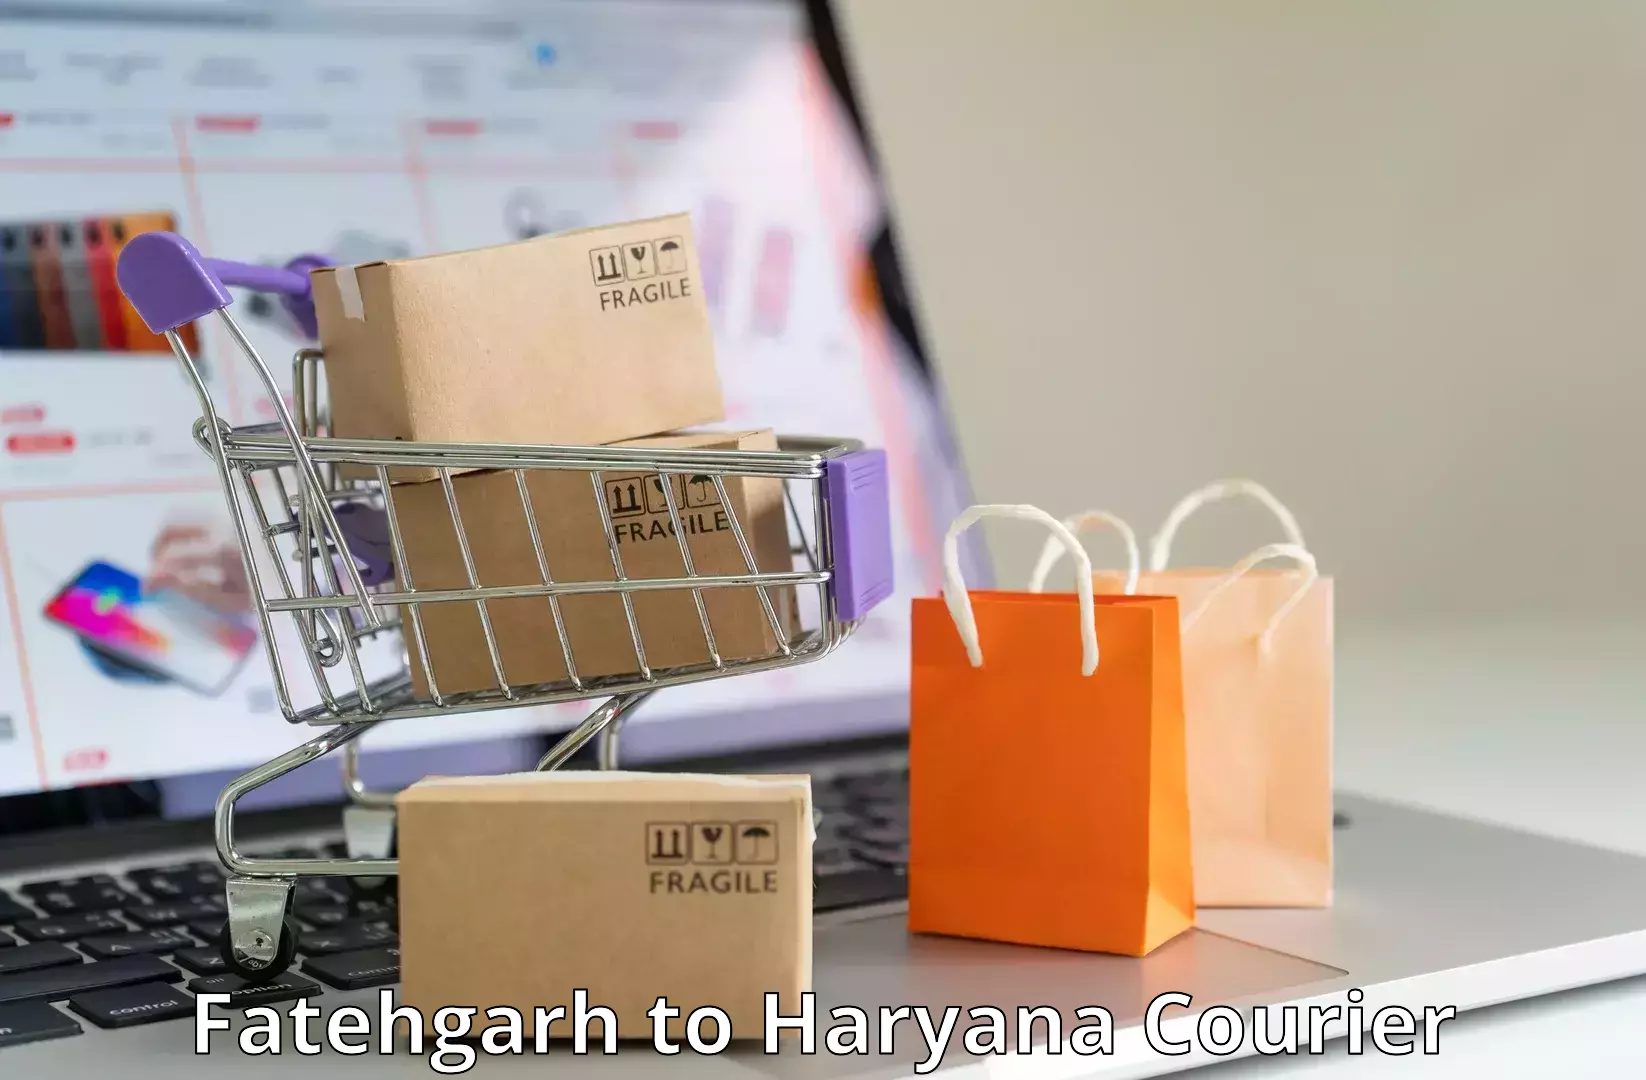 Overnight delivery services Fatehgarh to Haryana